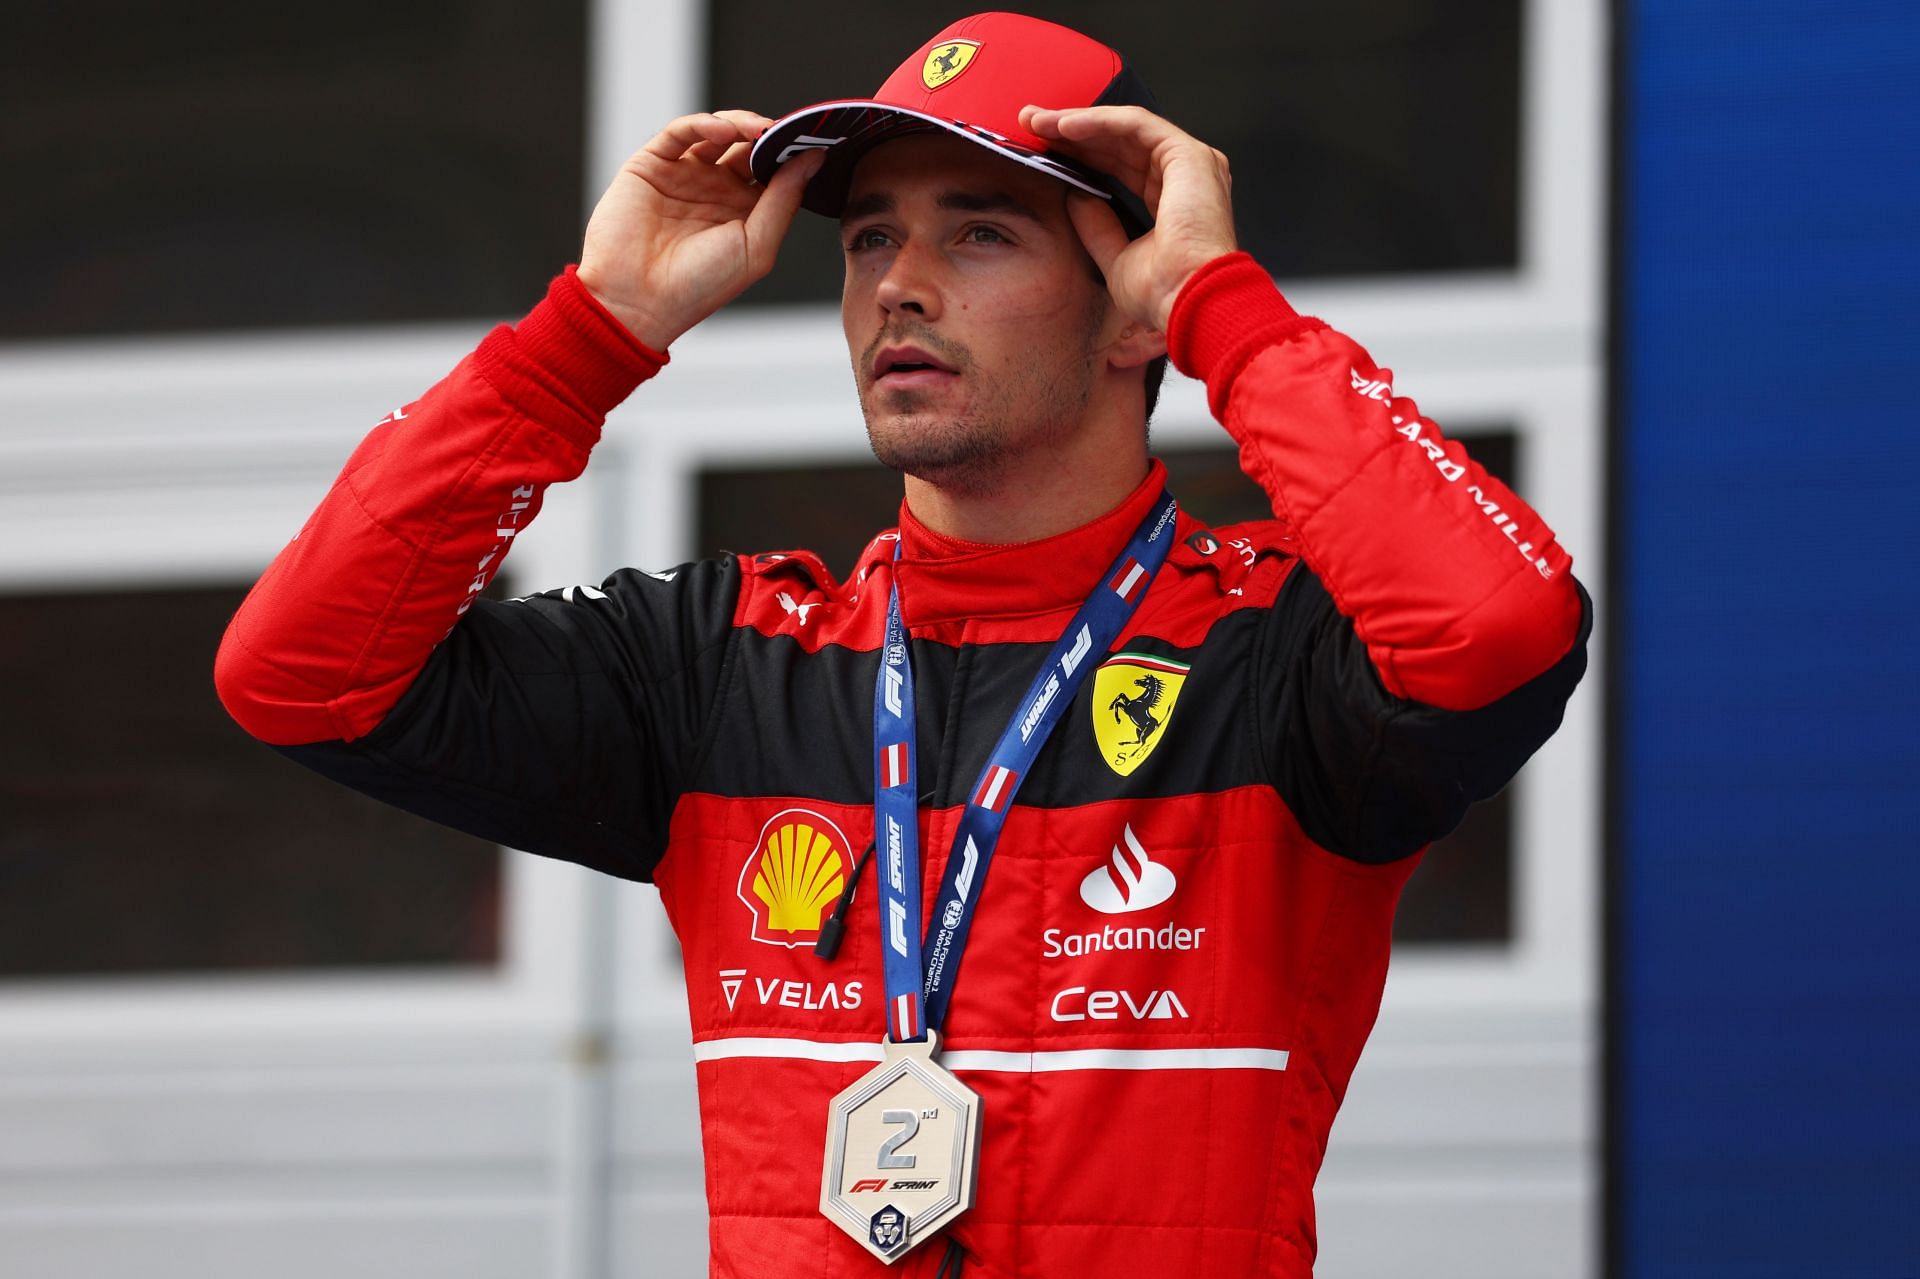 Ferrari driver Charles Leclerc after the 2022 F1 Austrian GP Sprint race. (Photo by Bryn Lennon/Getty Images)